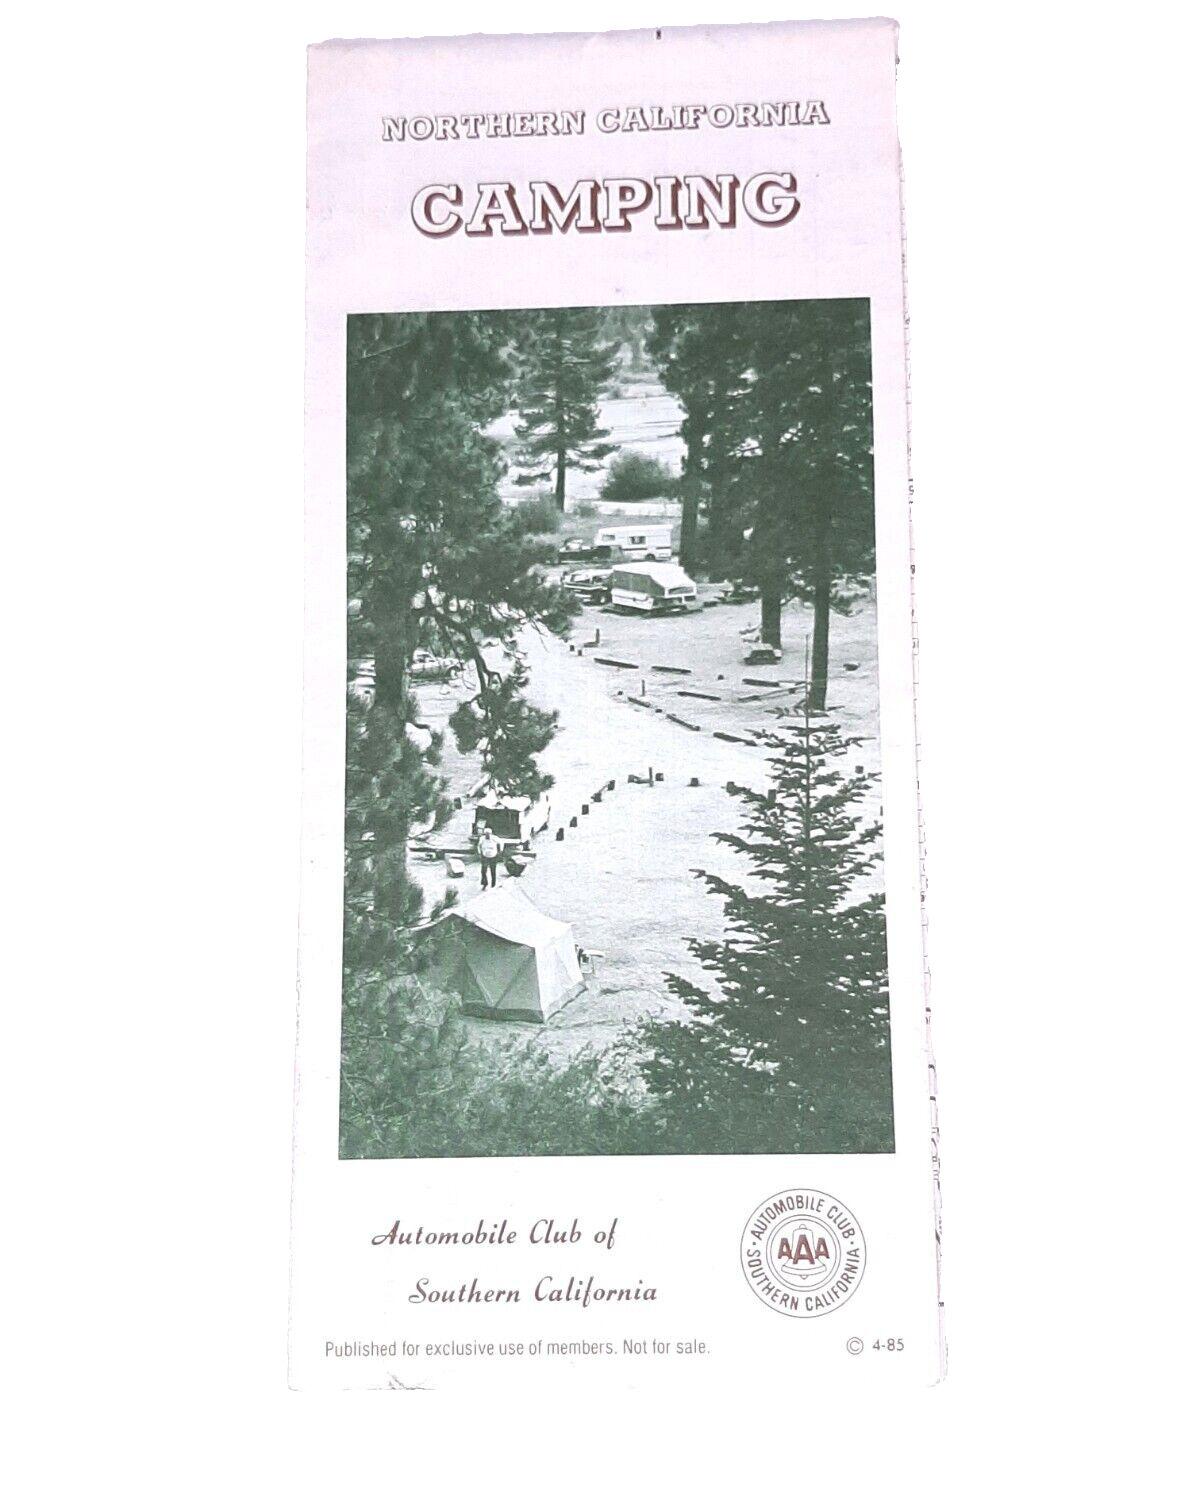 Vintage 1984 Northern California Camping Map AAA Automobile Club Southern CA